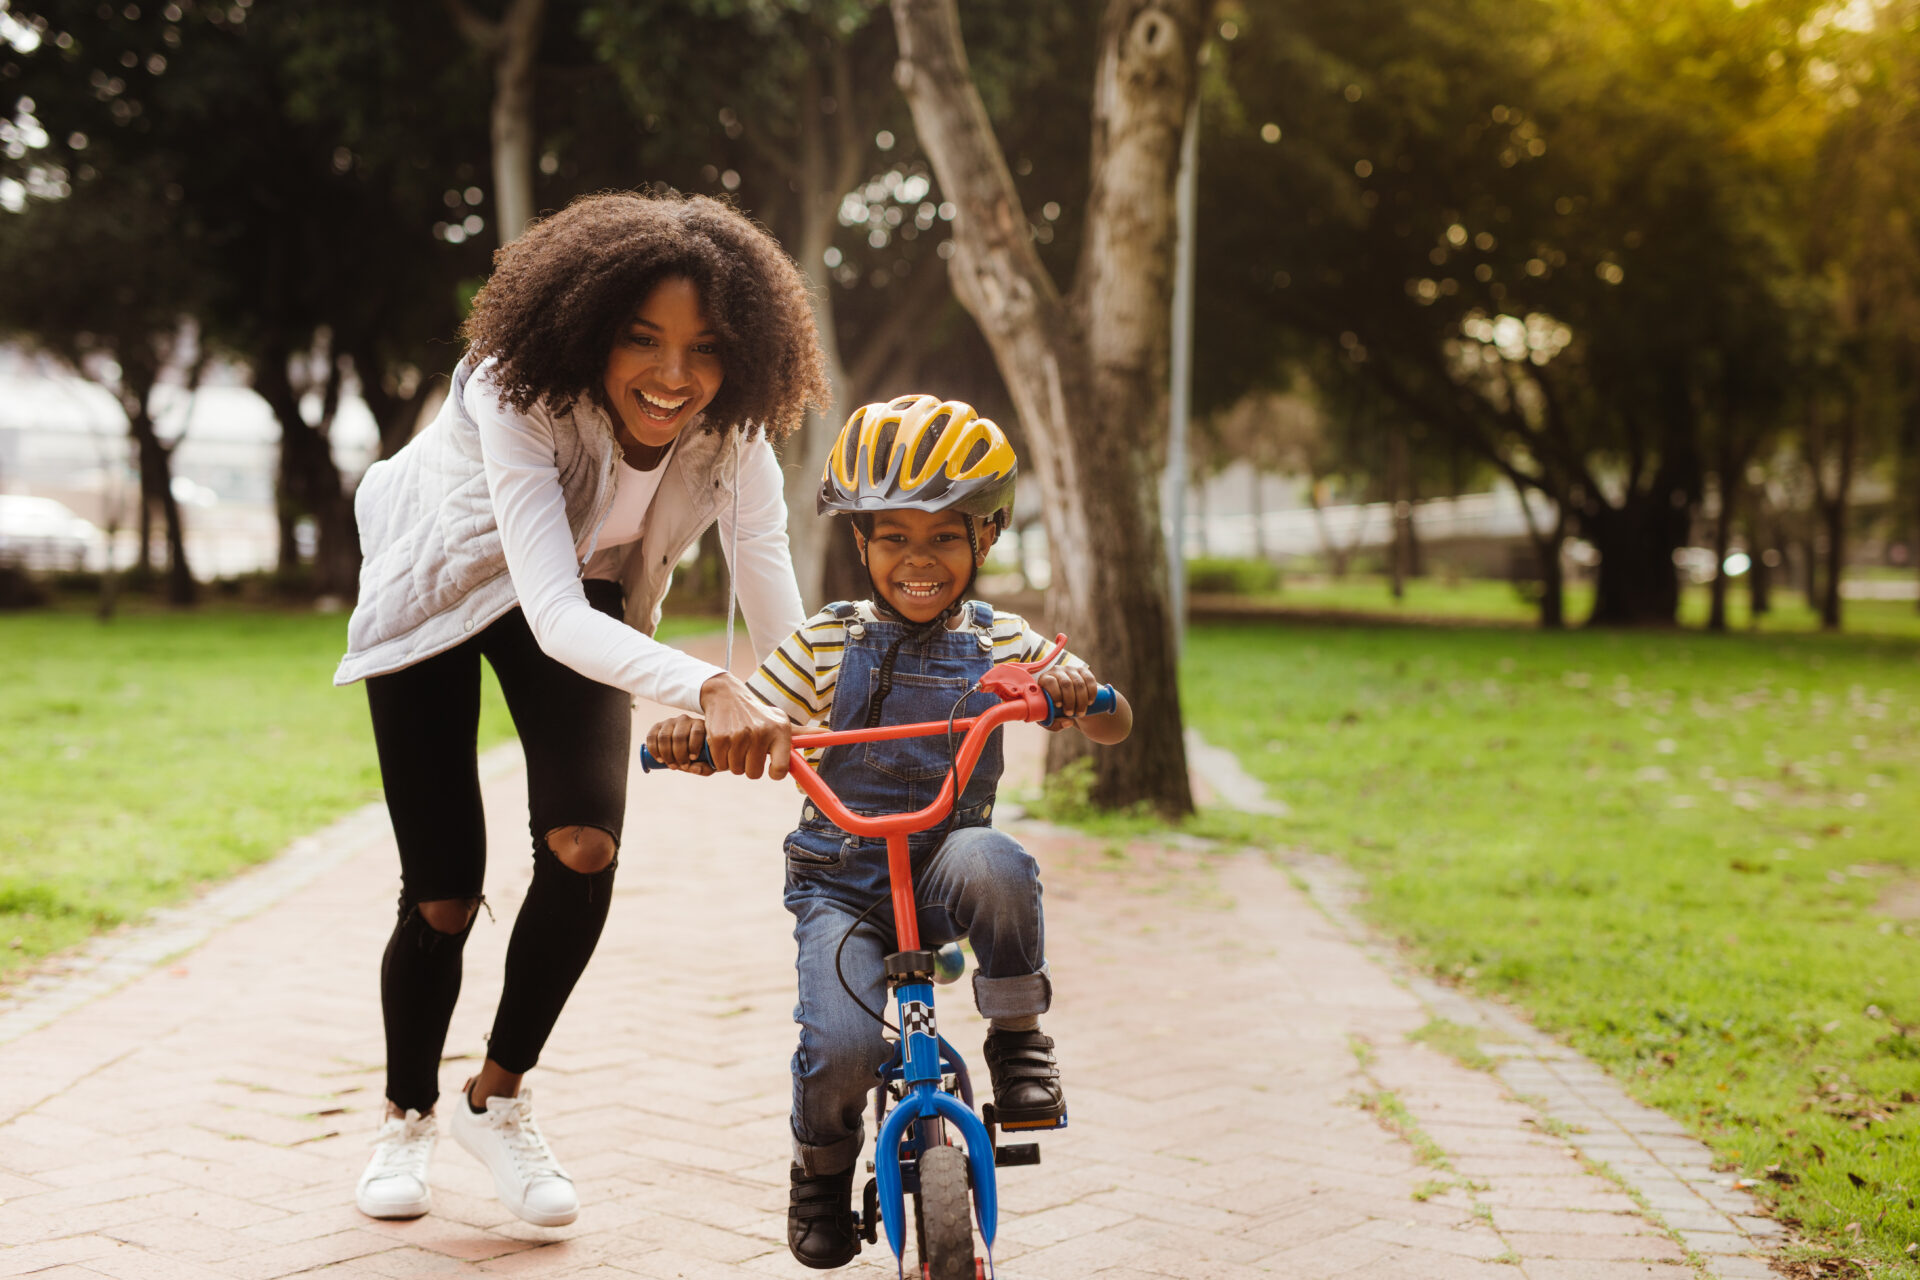 Mother teaching son how to ride a bike in the park.